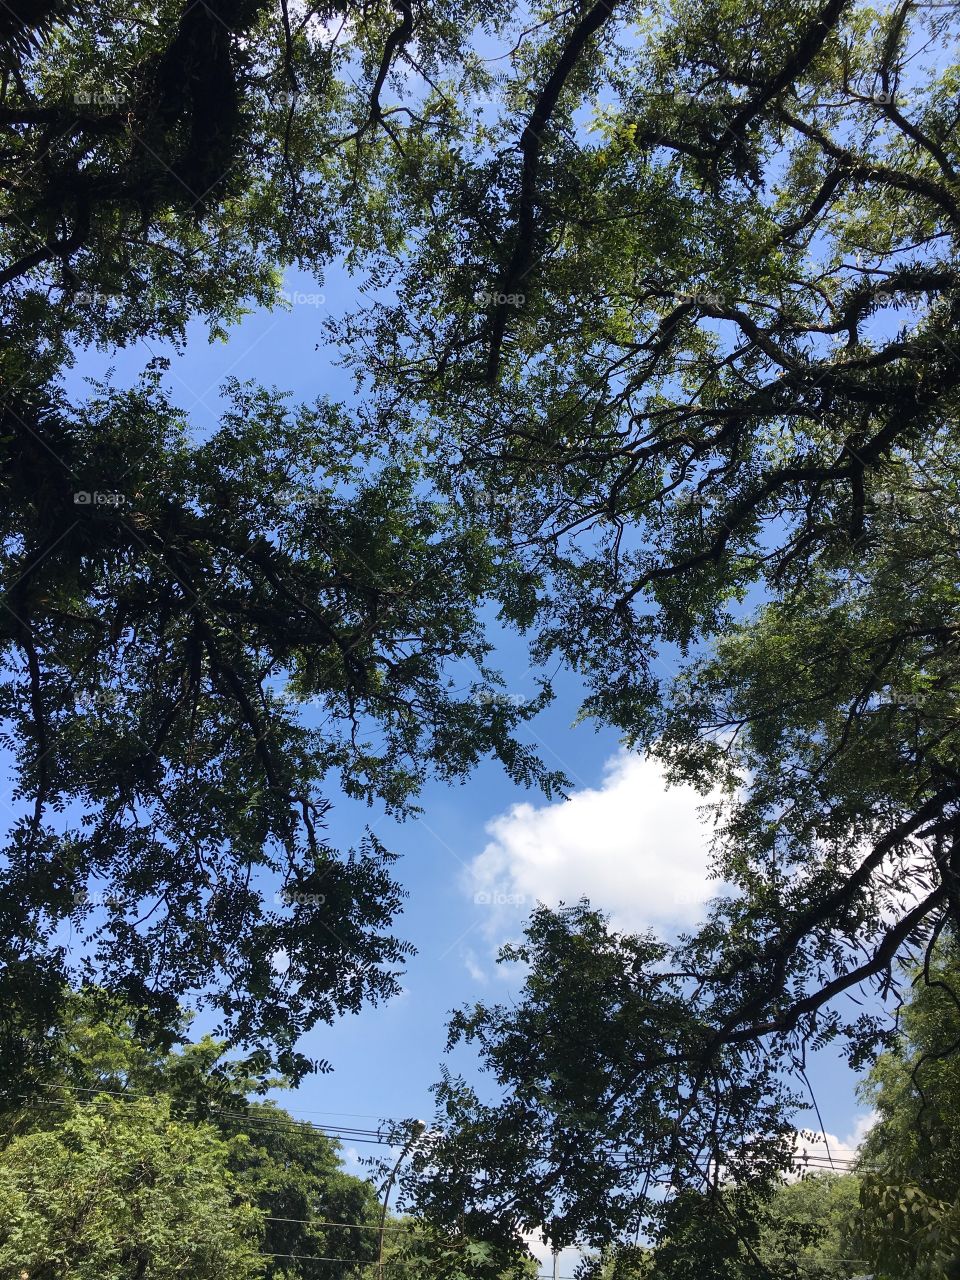 Blue sky and green leaves
